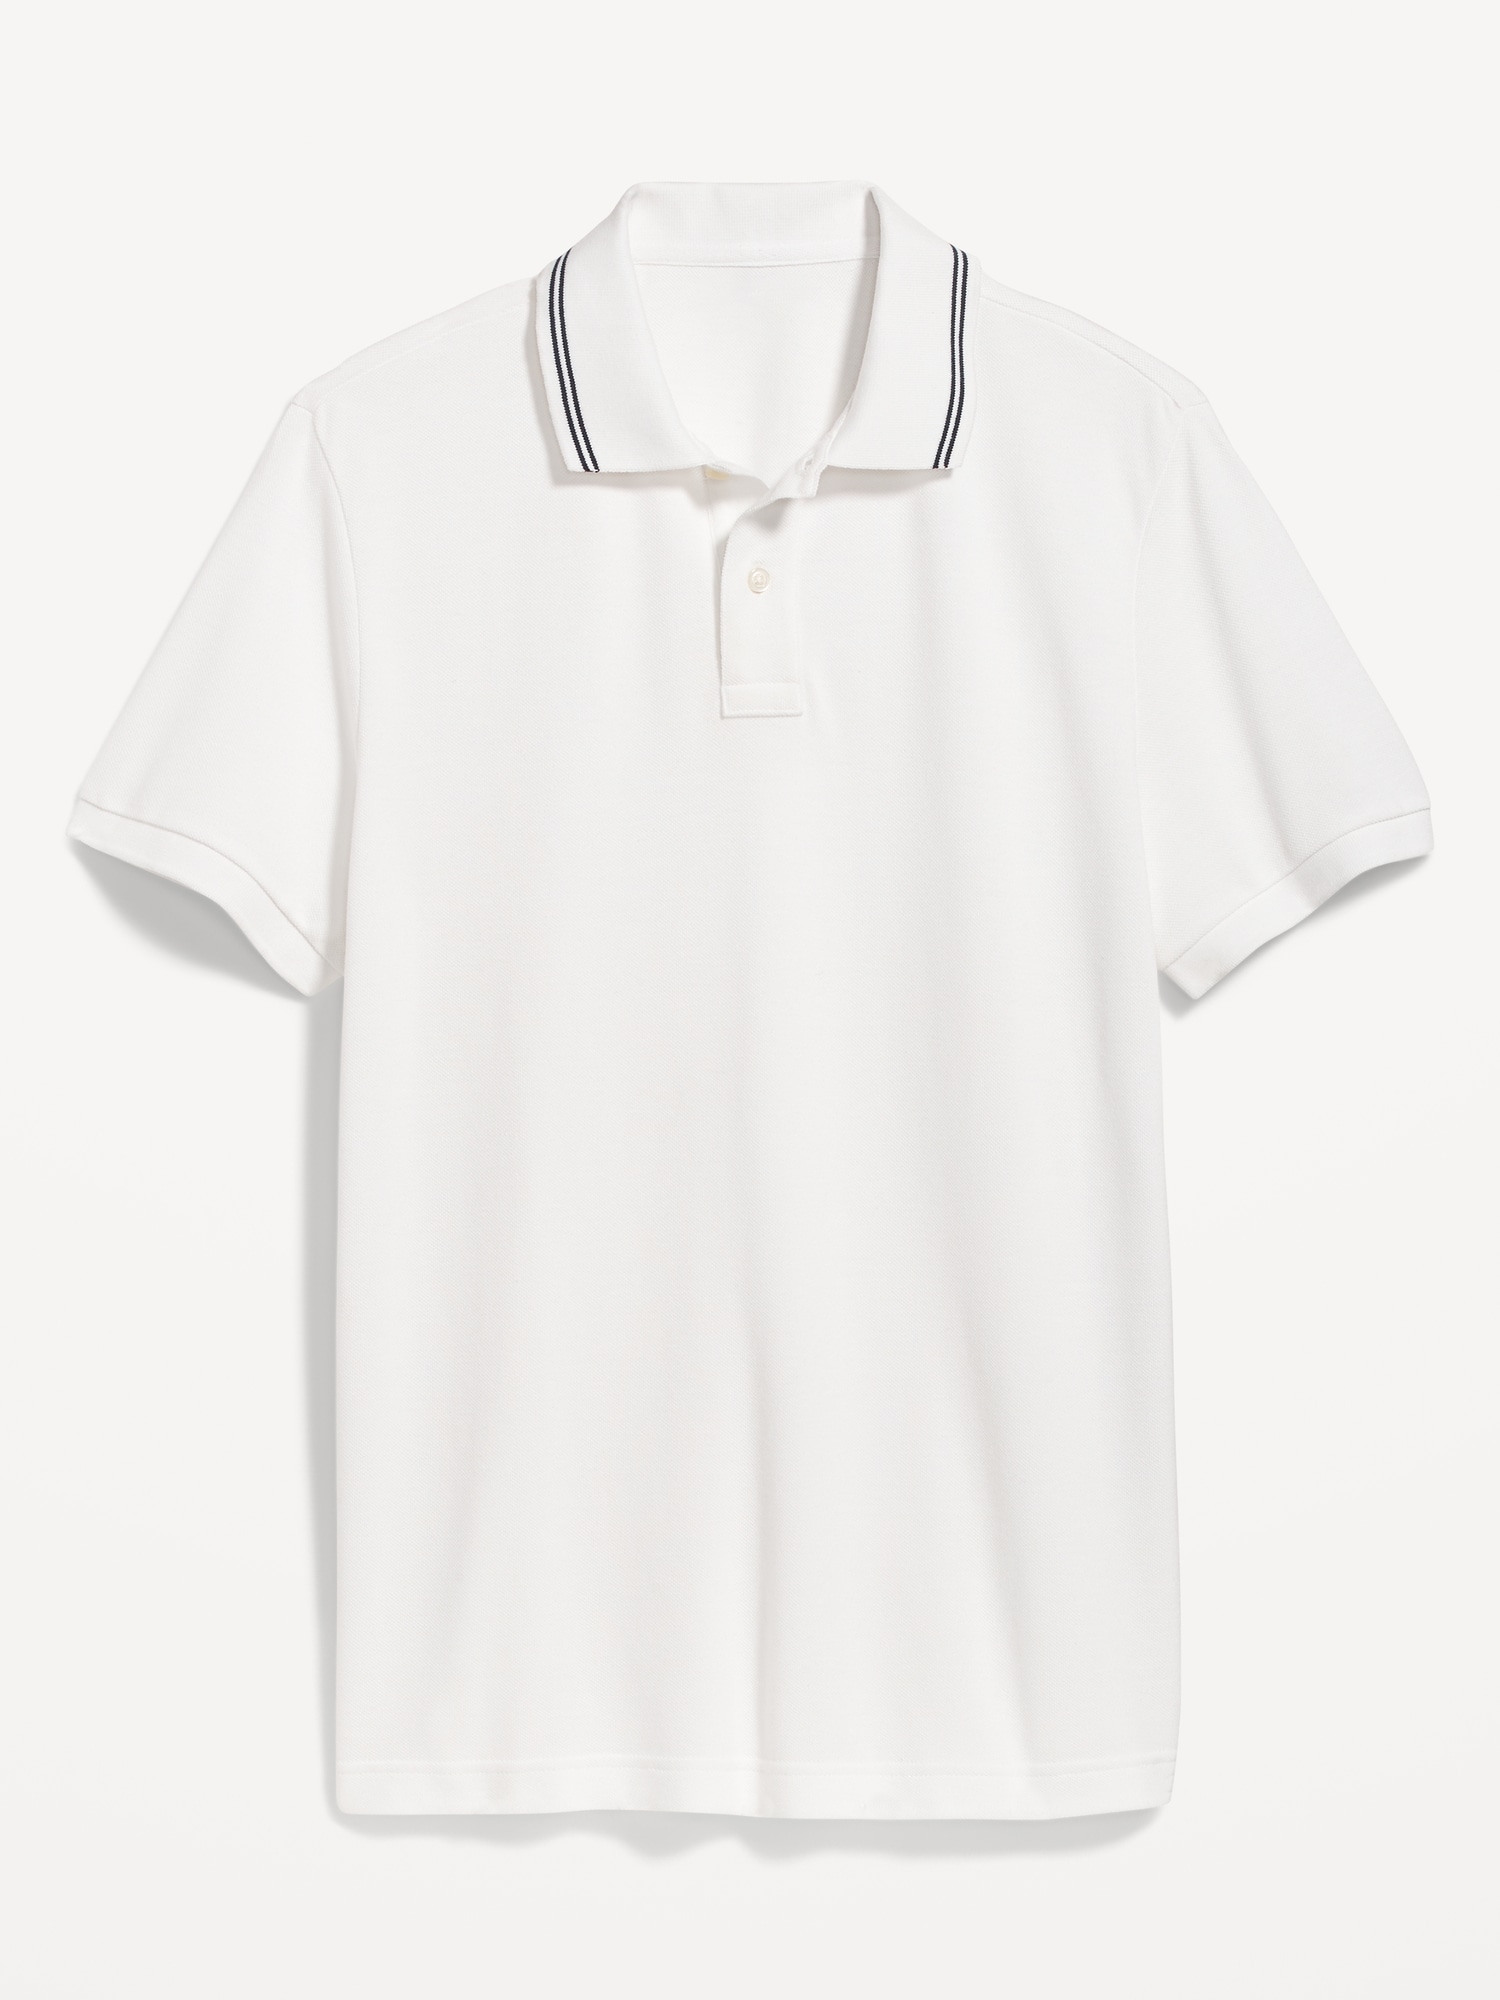 Tipped-Collar Classic Fit Pique Polo